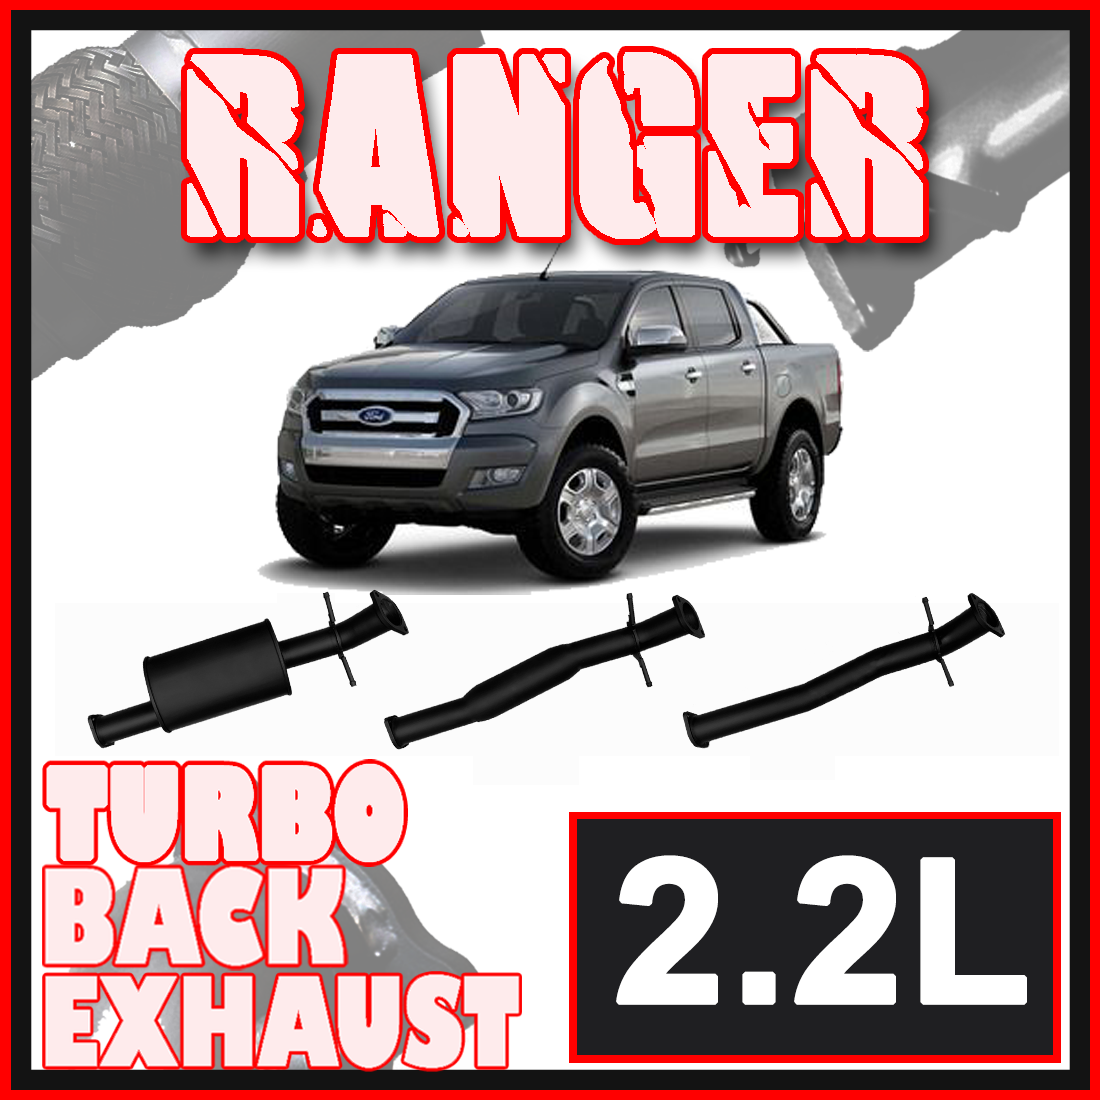 Ford PX Ranger Exhaust 2.2L 3 Inch Systems image